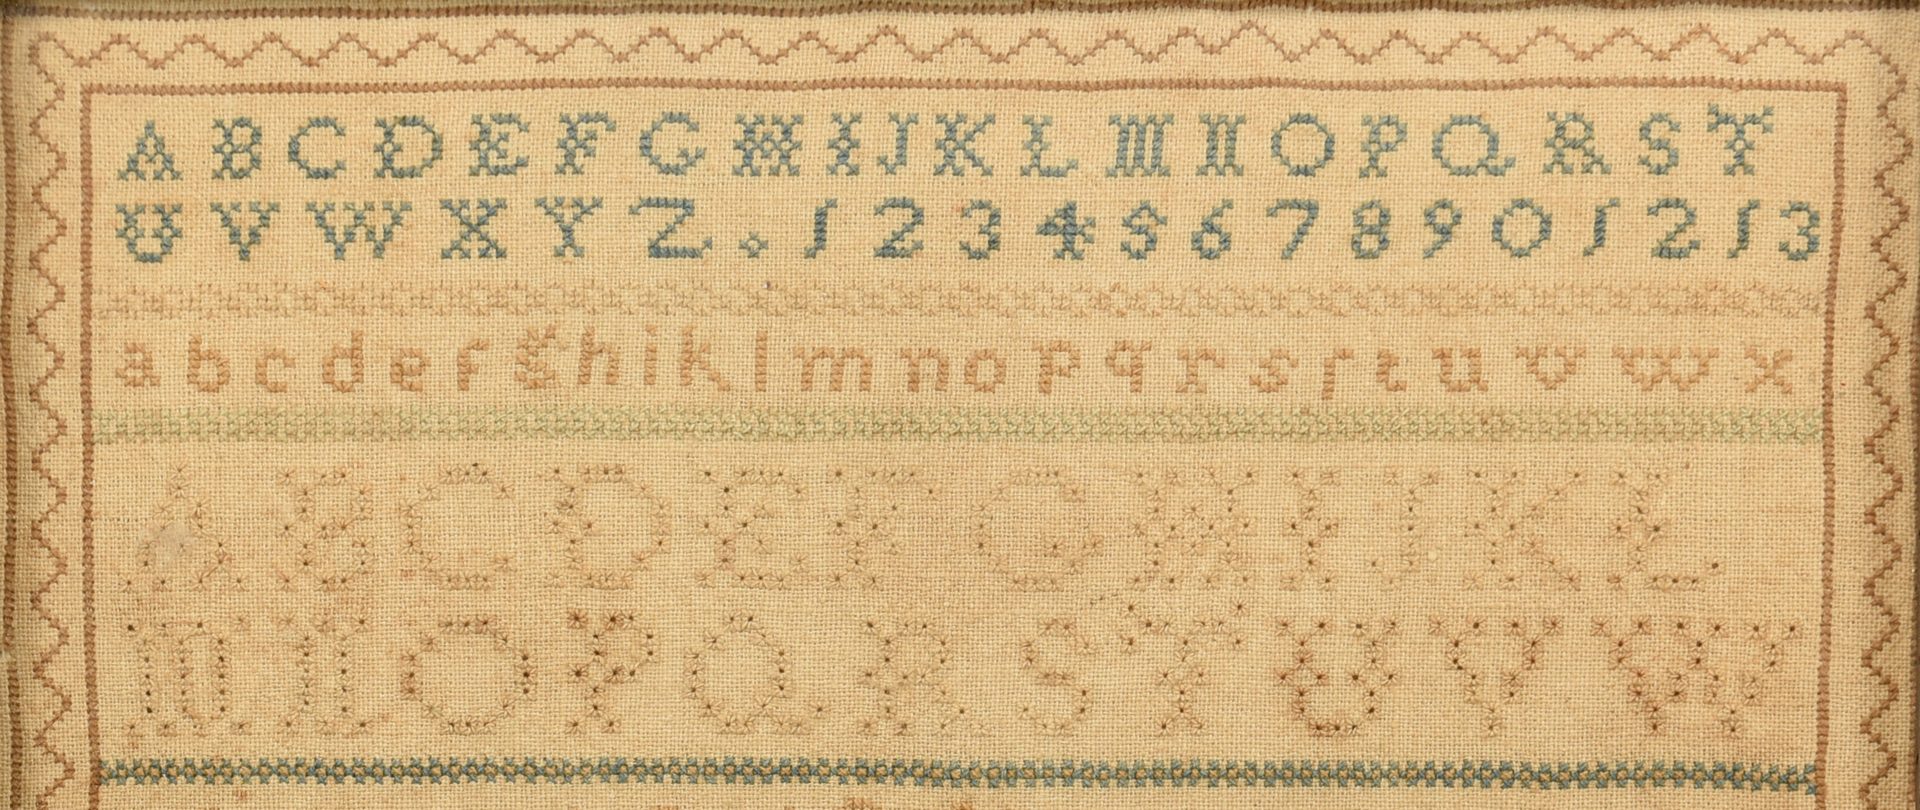 Lot 292: Montgomery Co. Tennessee Sampler